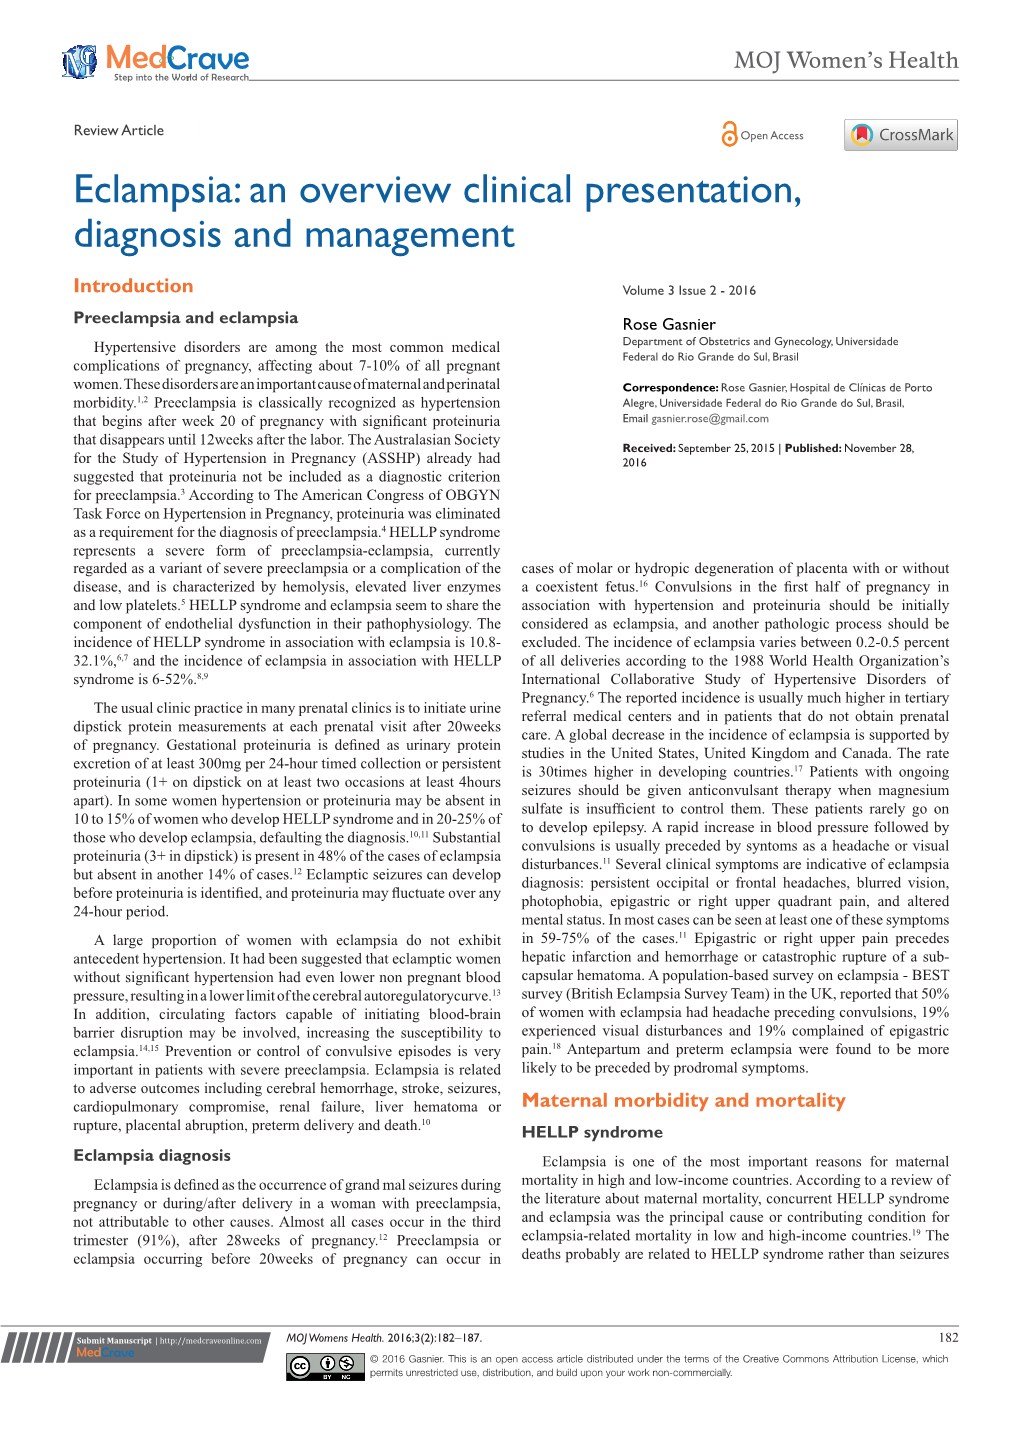 Eclampsia: an Overview Clinical Presentation, Diagnosis and Management